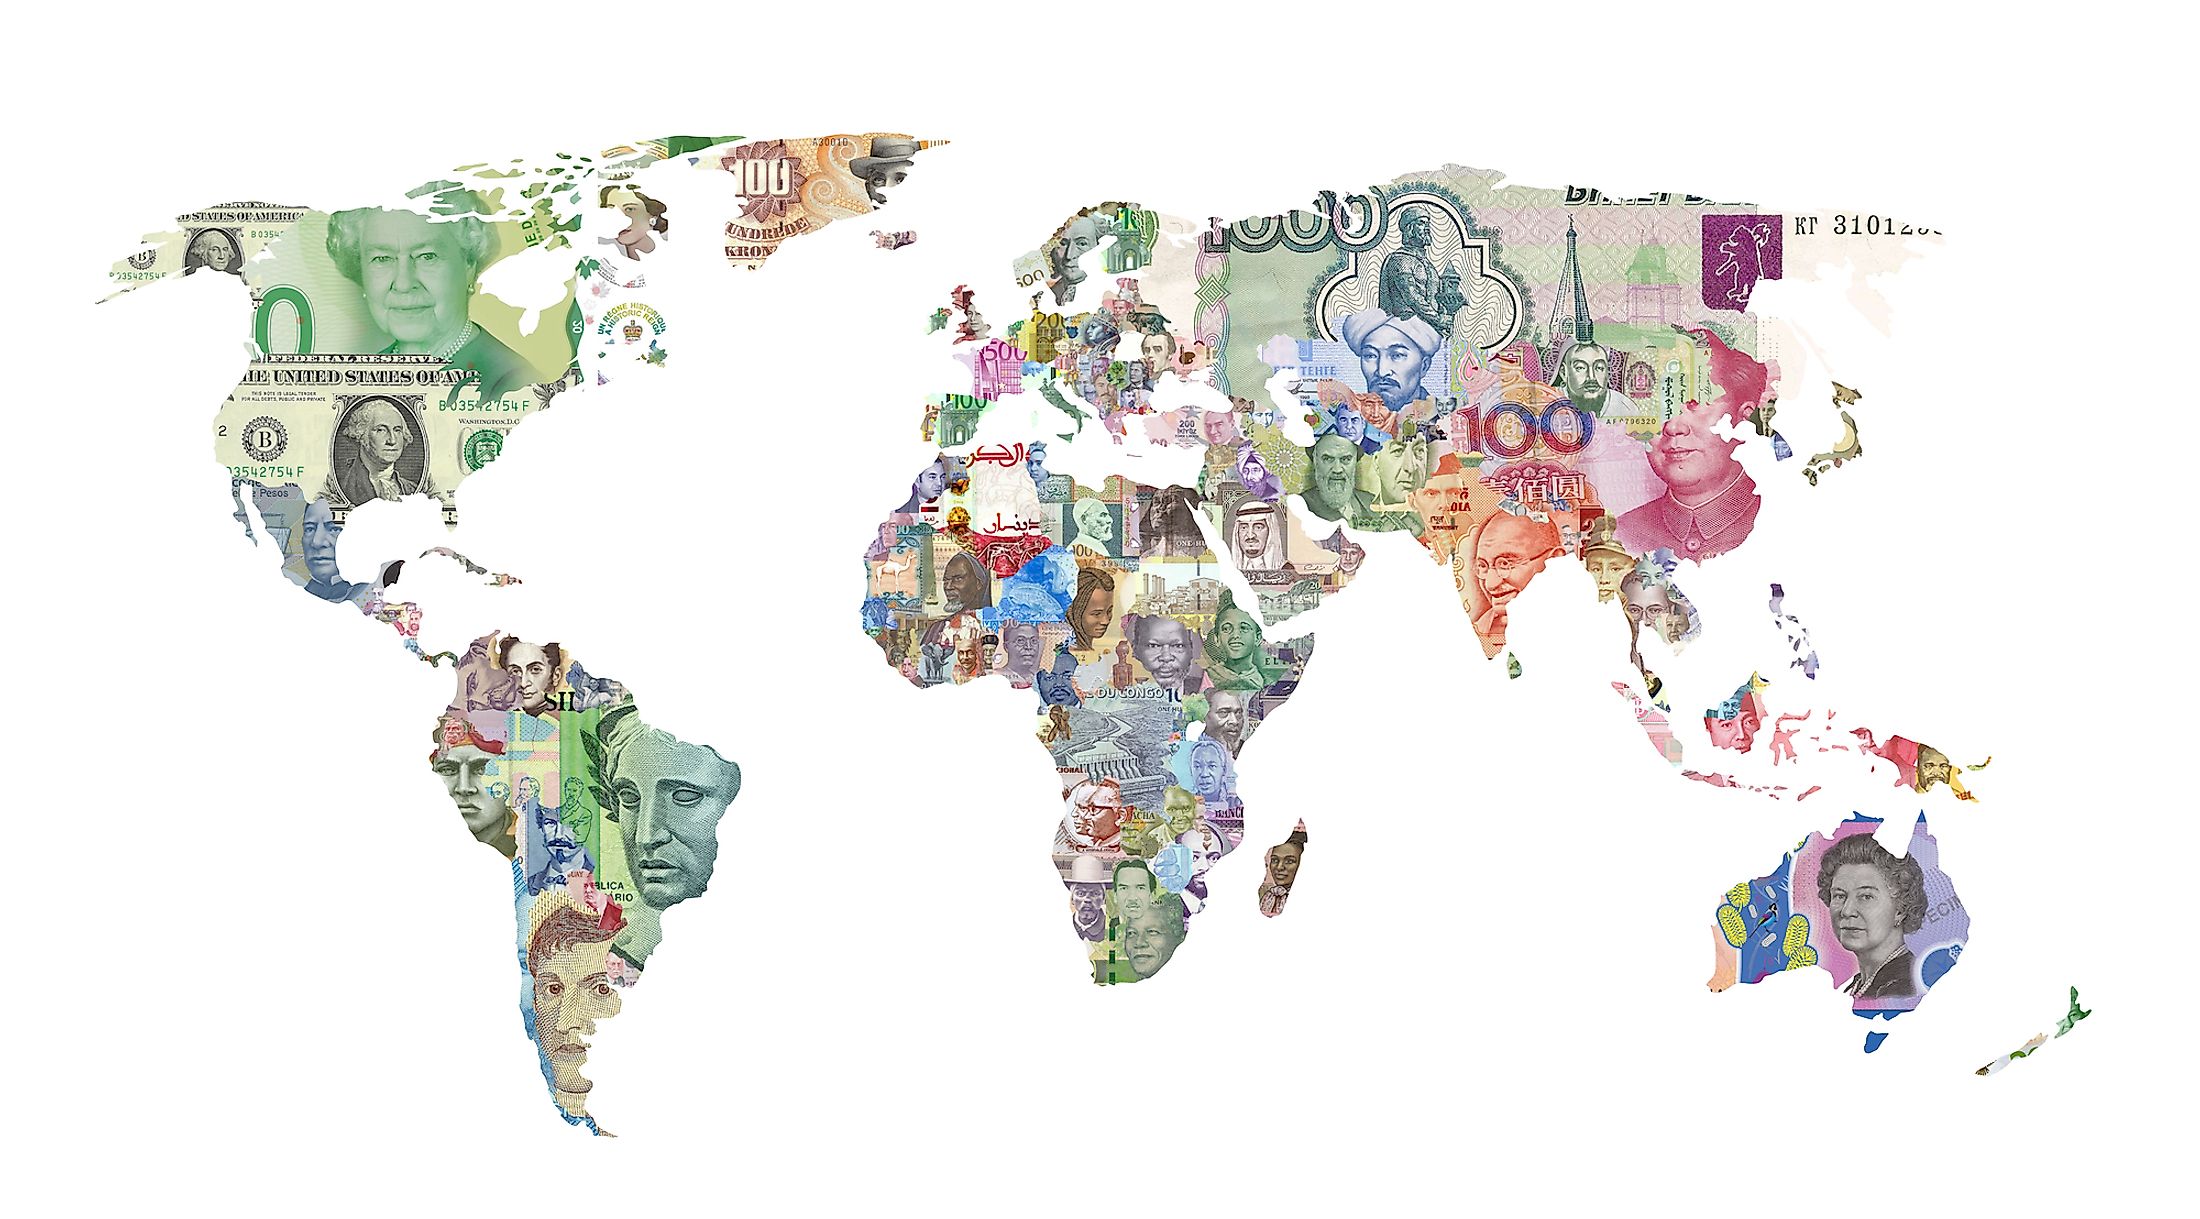 Currencies of the world